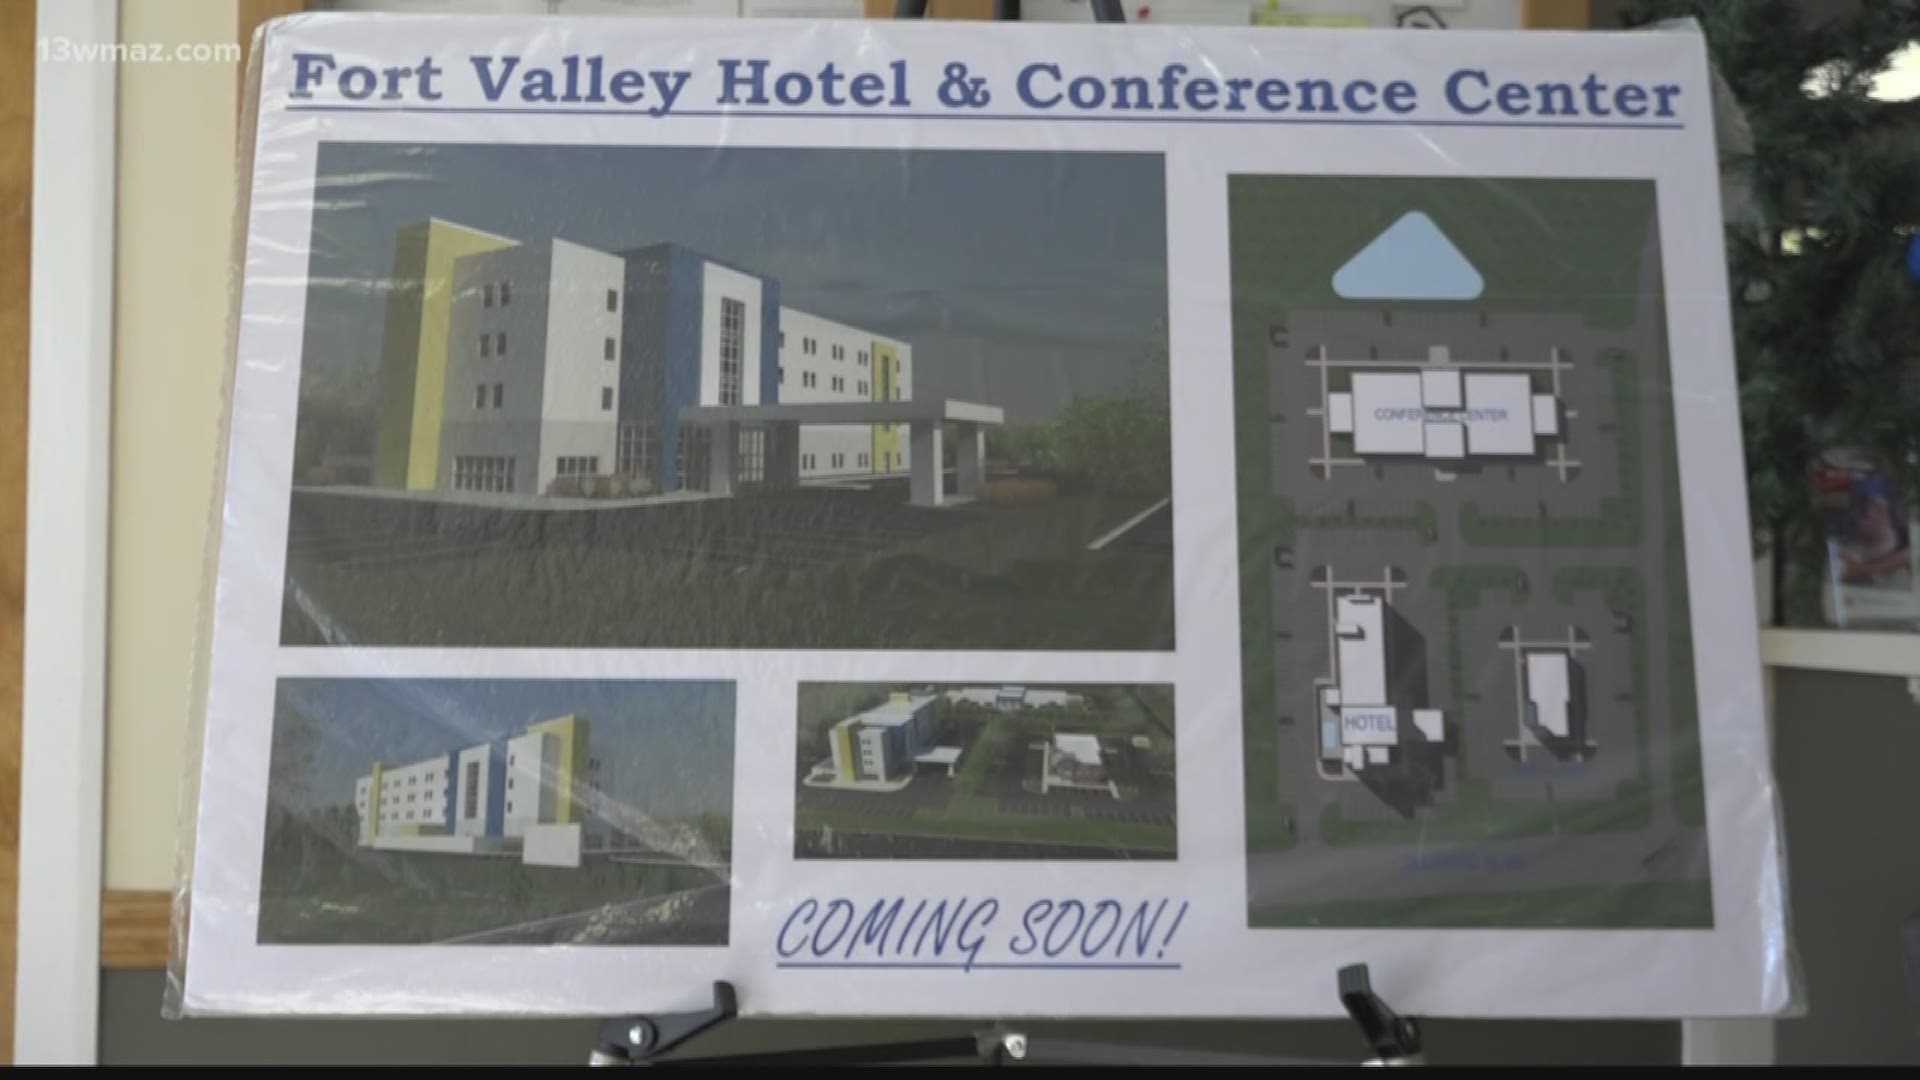 A hotel and conference center project that's been in the works for several years is moving closer to breaking ground, according to city leaders